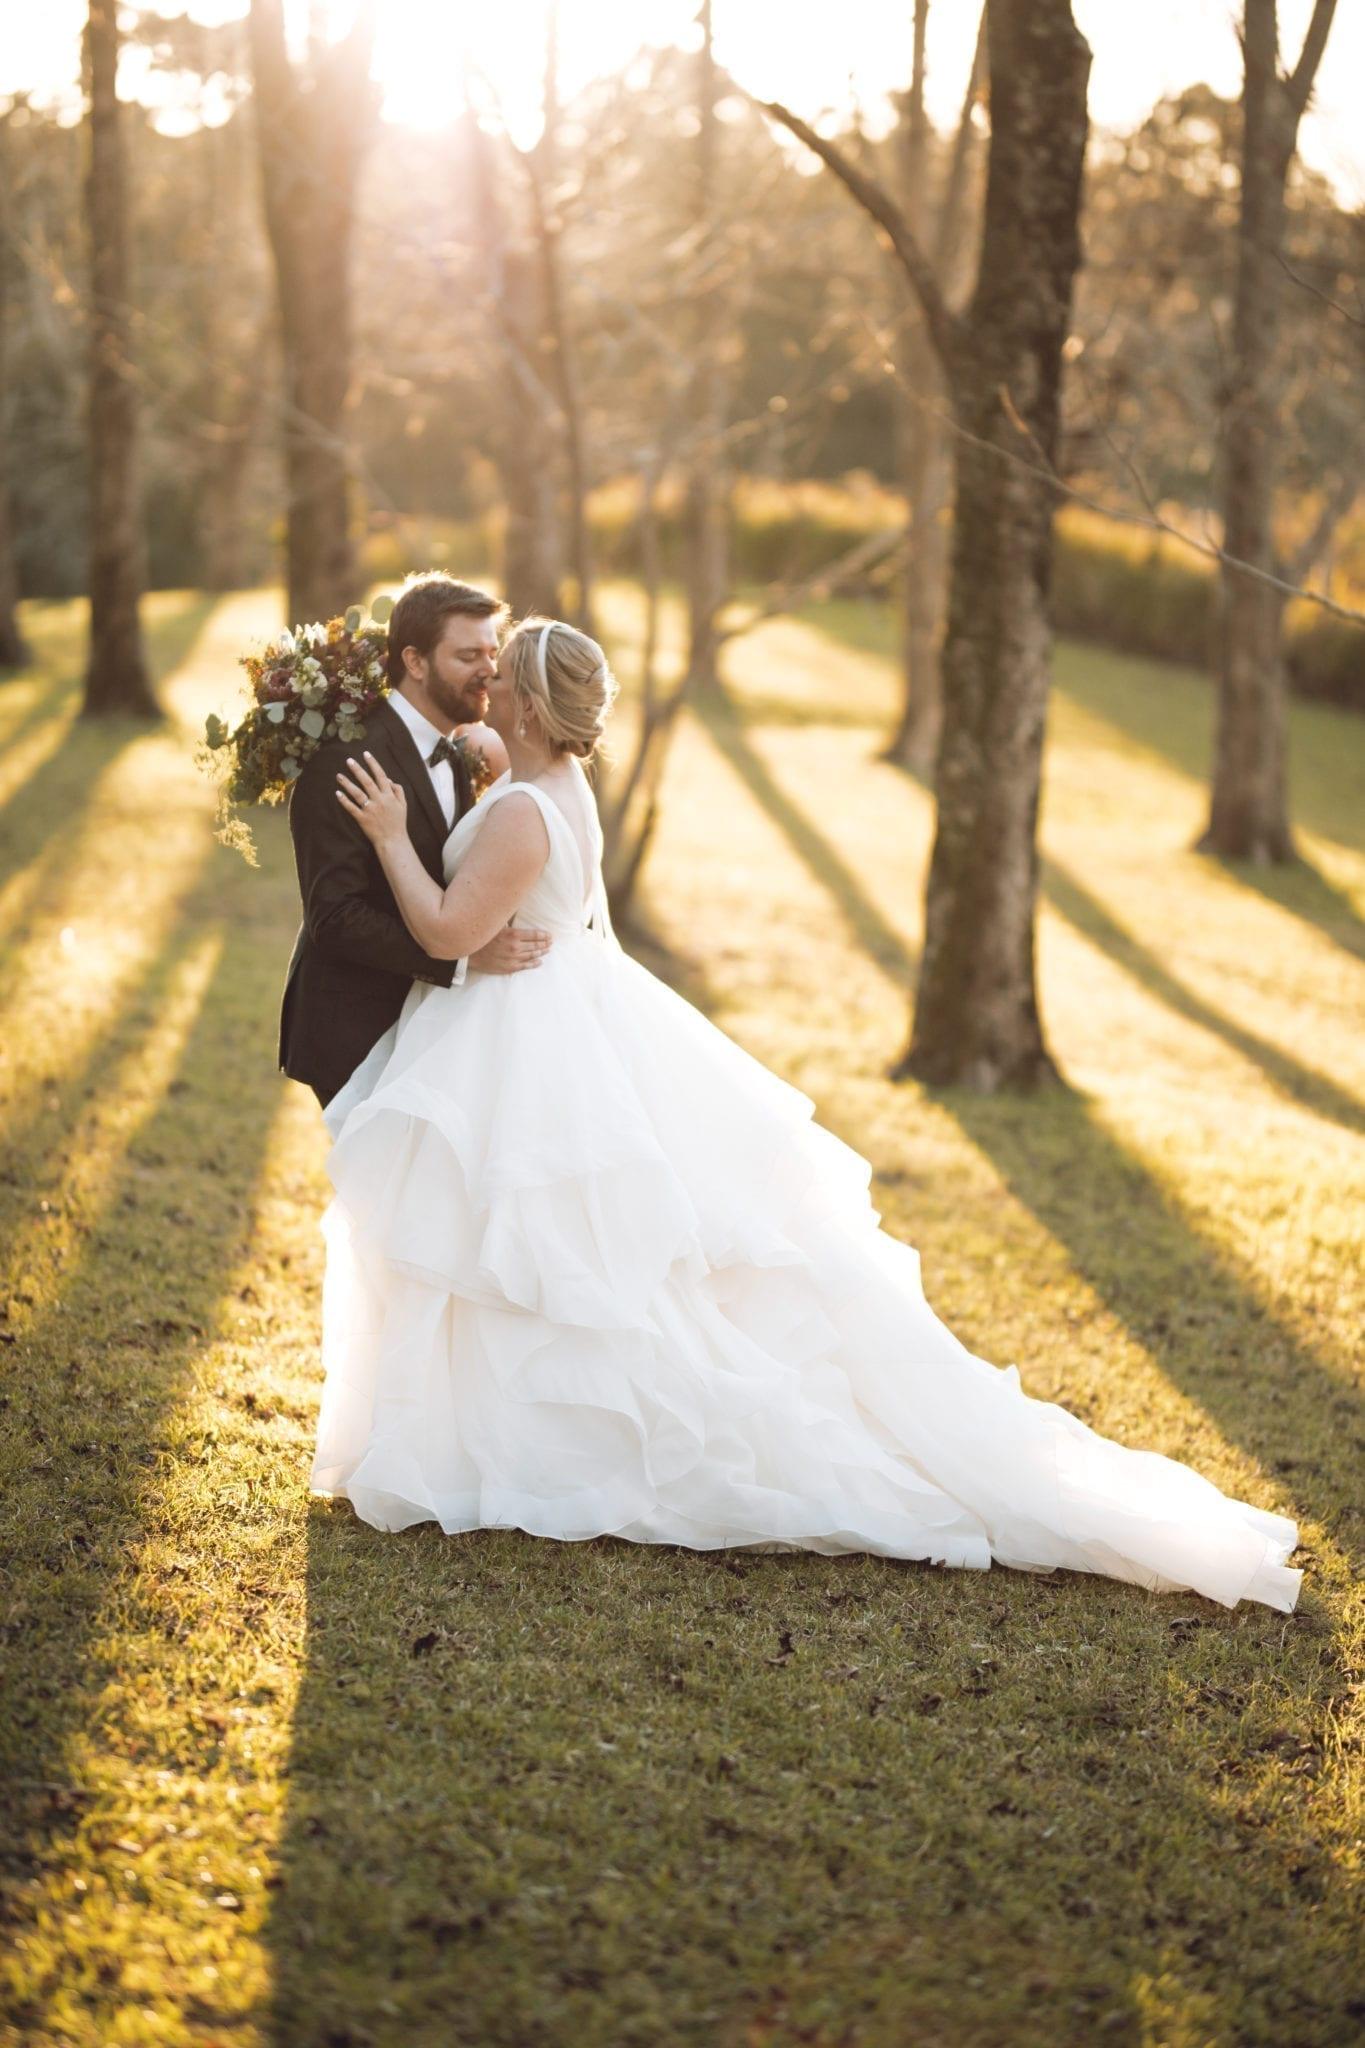 Charmaine & Daniel's Epic Winter Wedding - White Lily Couture